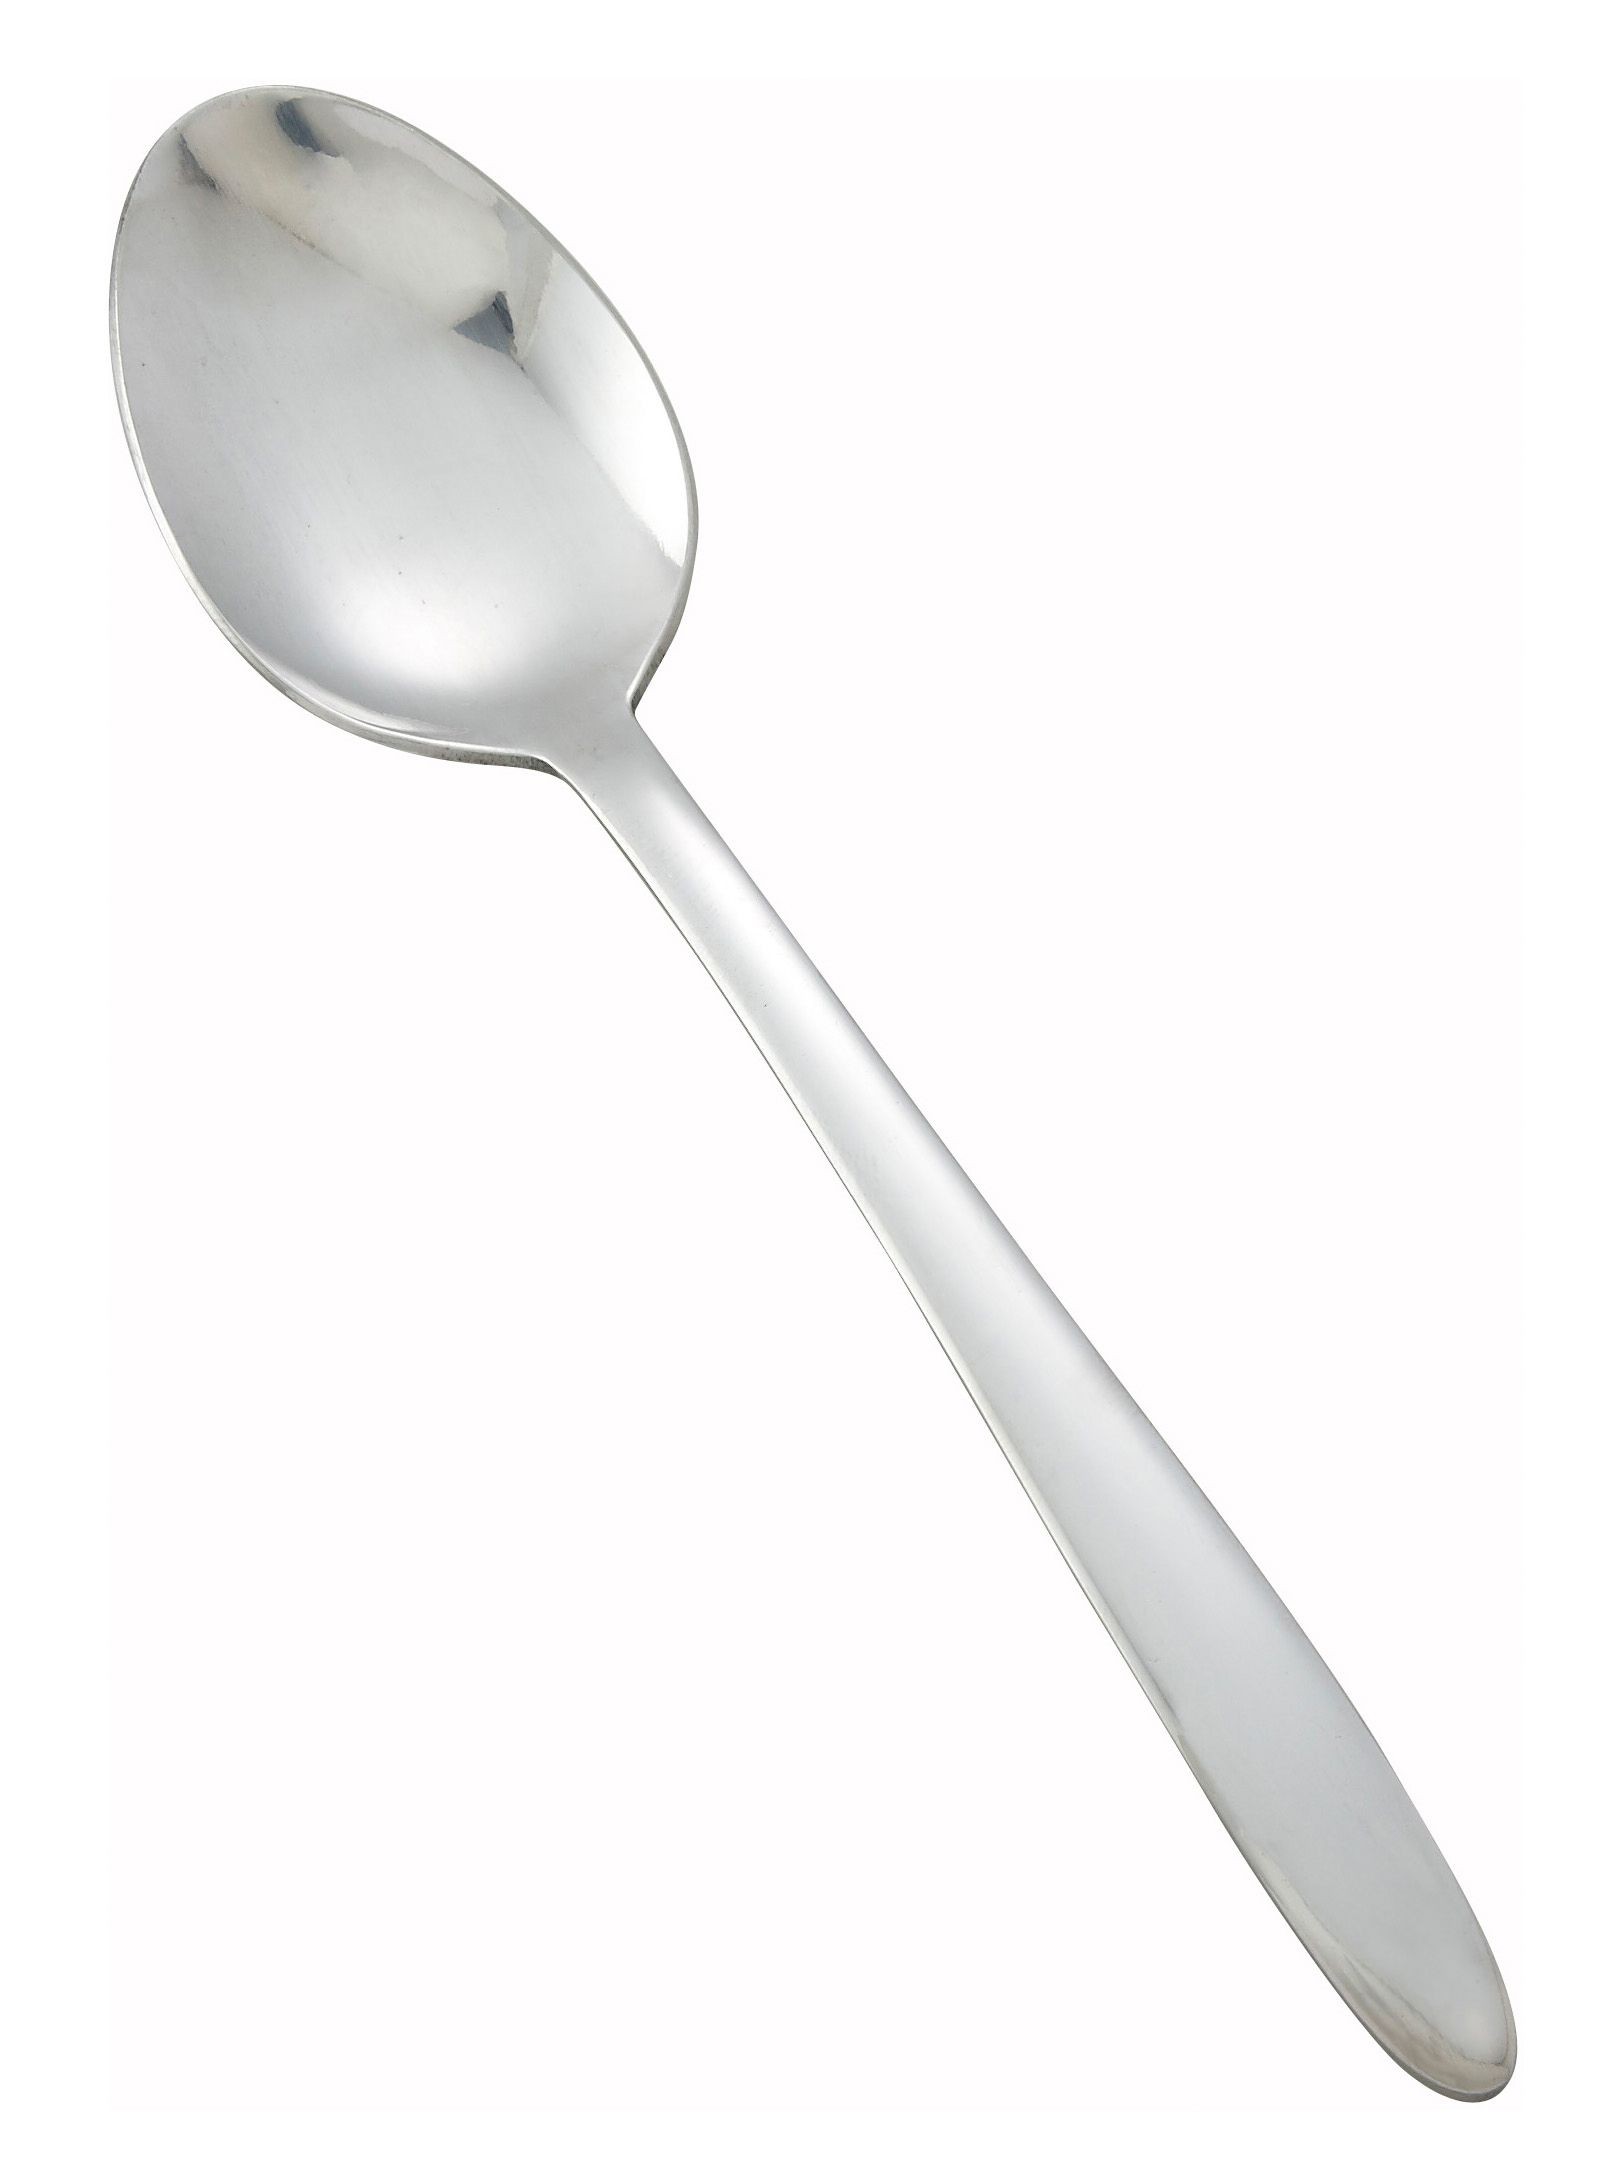 Winco 0019-03 Flute Heavy Weight Mirror Finish Stainless Steel Dinner Spoon (12/Pack)